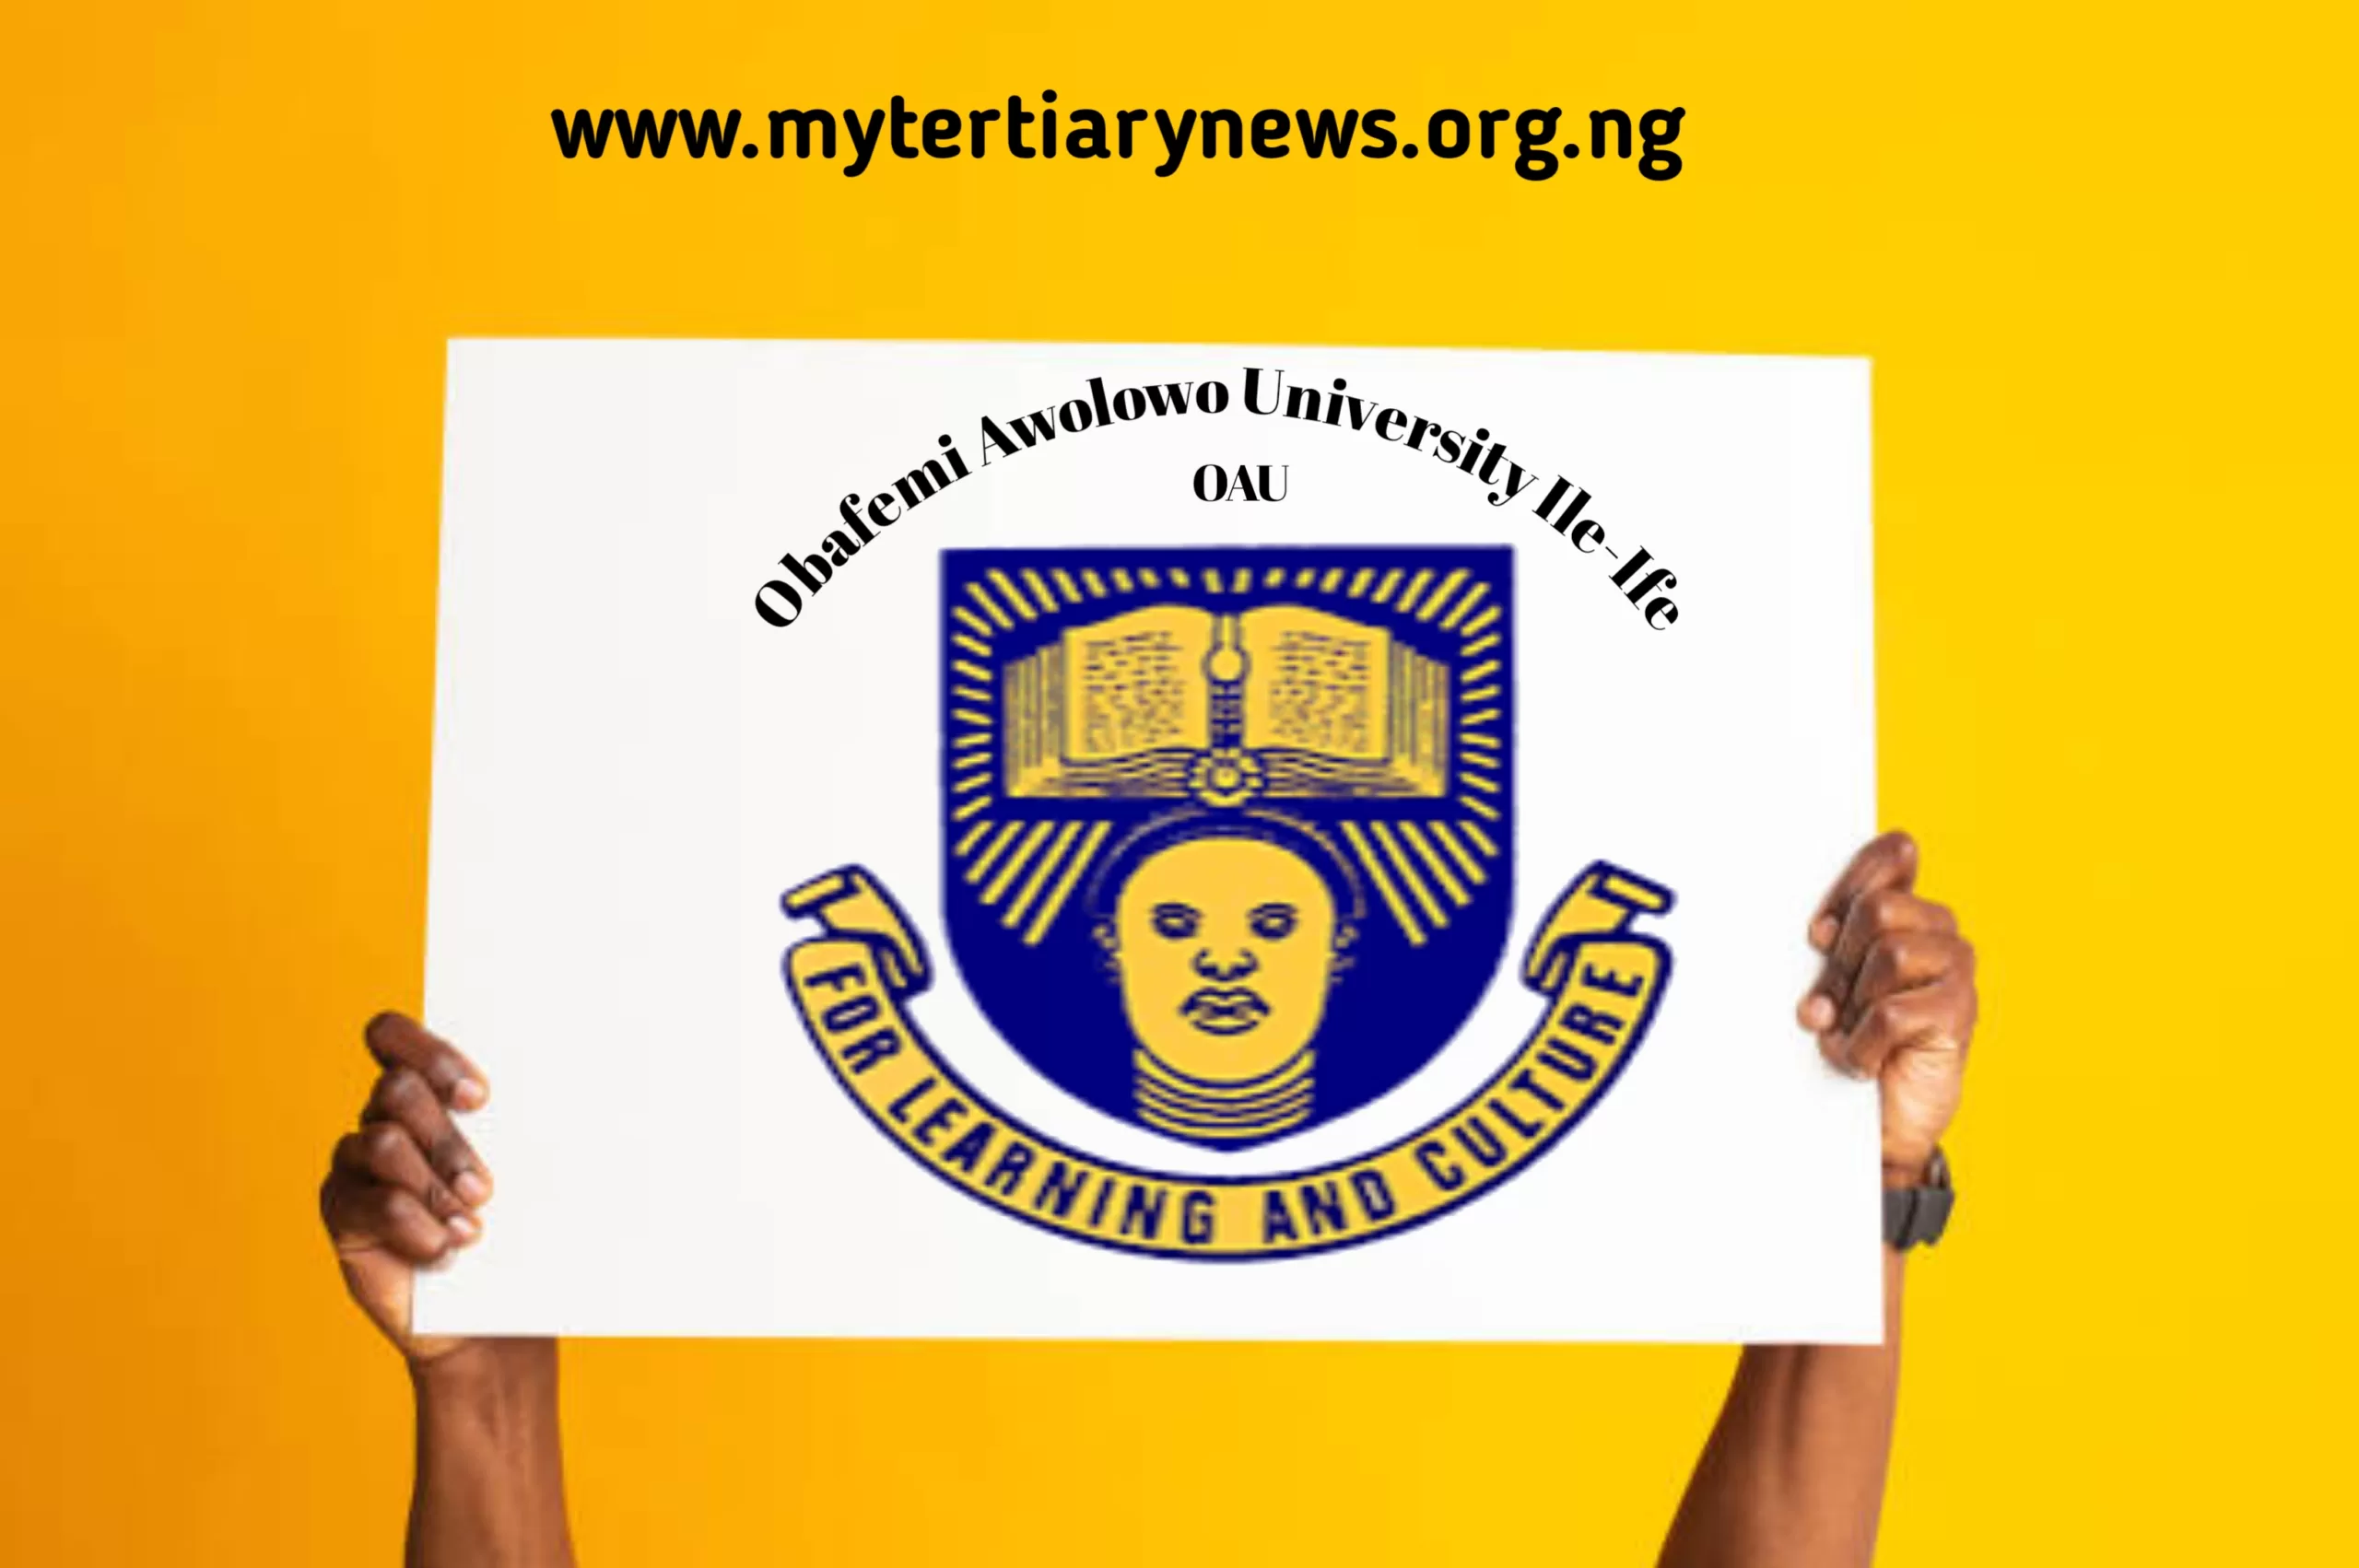 OAU Image || What is OAU Cut Off Mark for All Courses